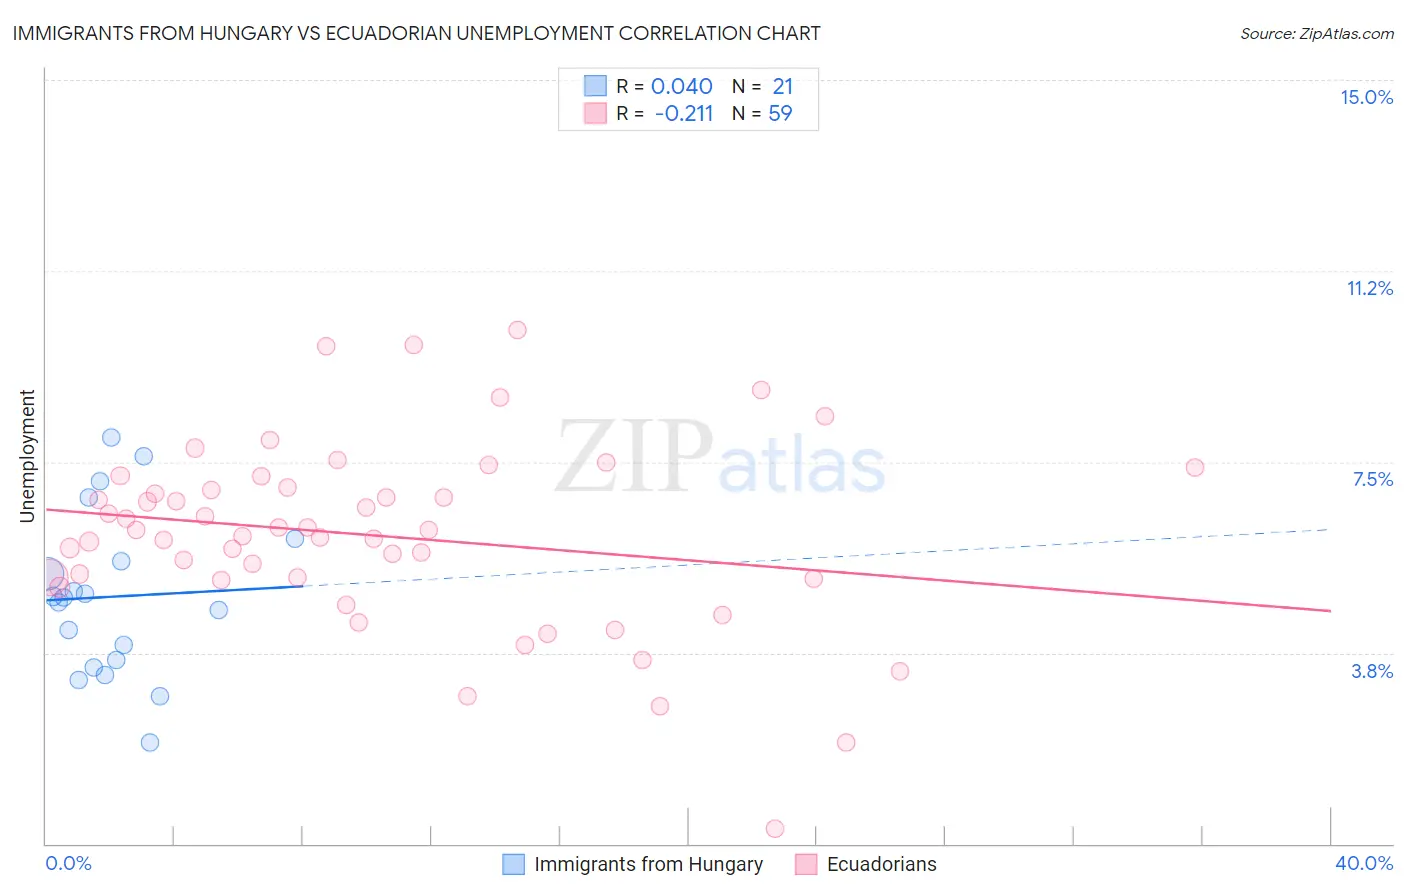 Immigrants from Hungary vs Ecuadorian Unemployment